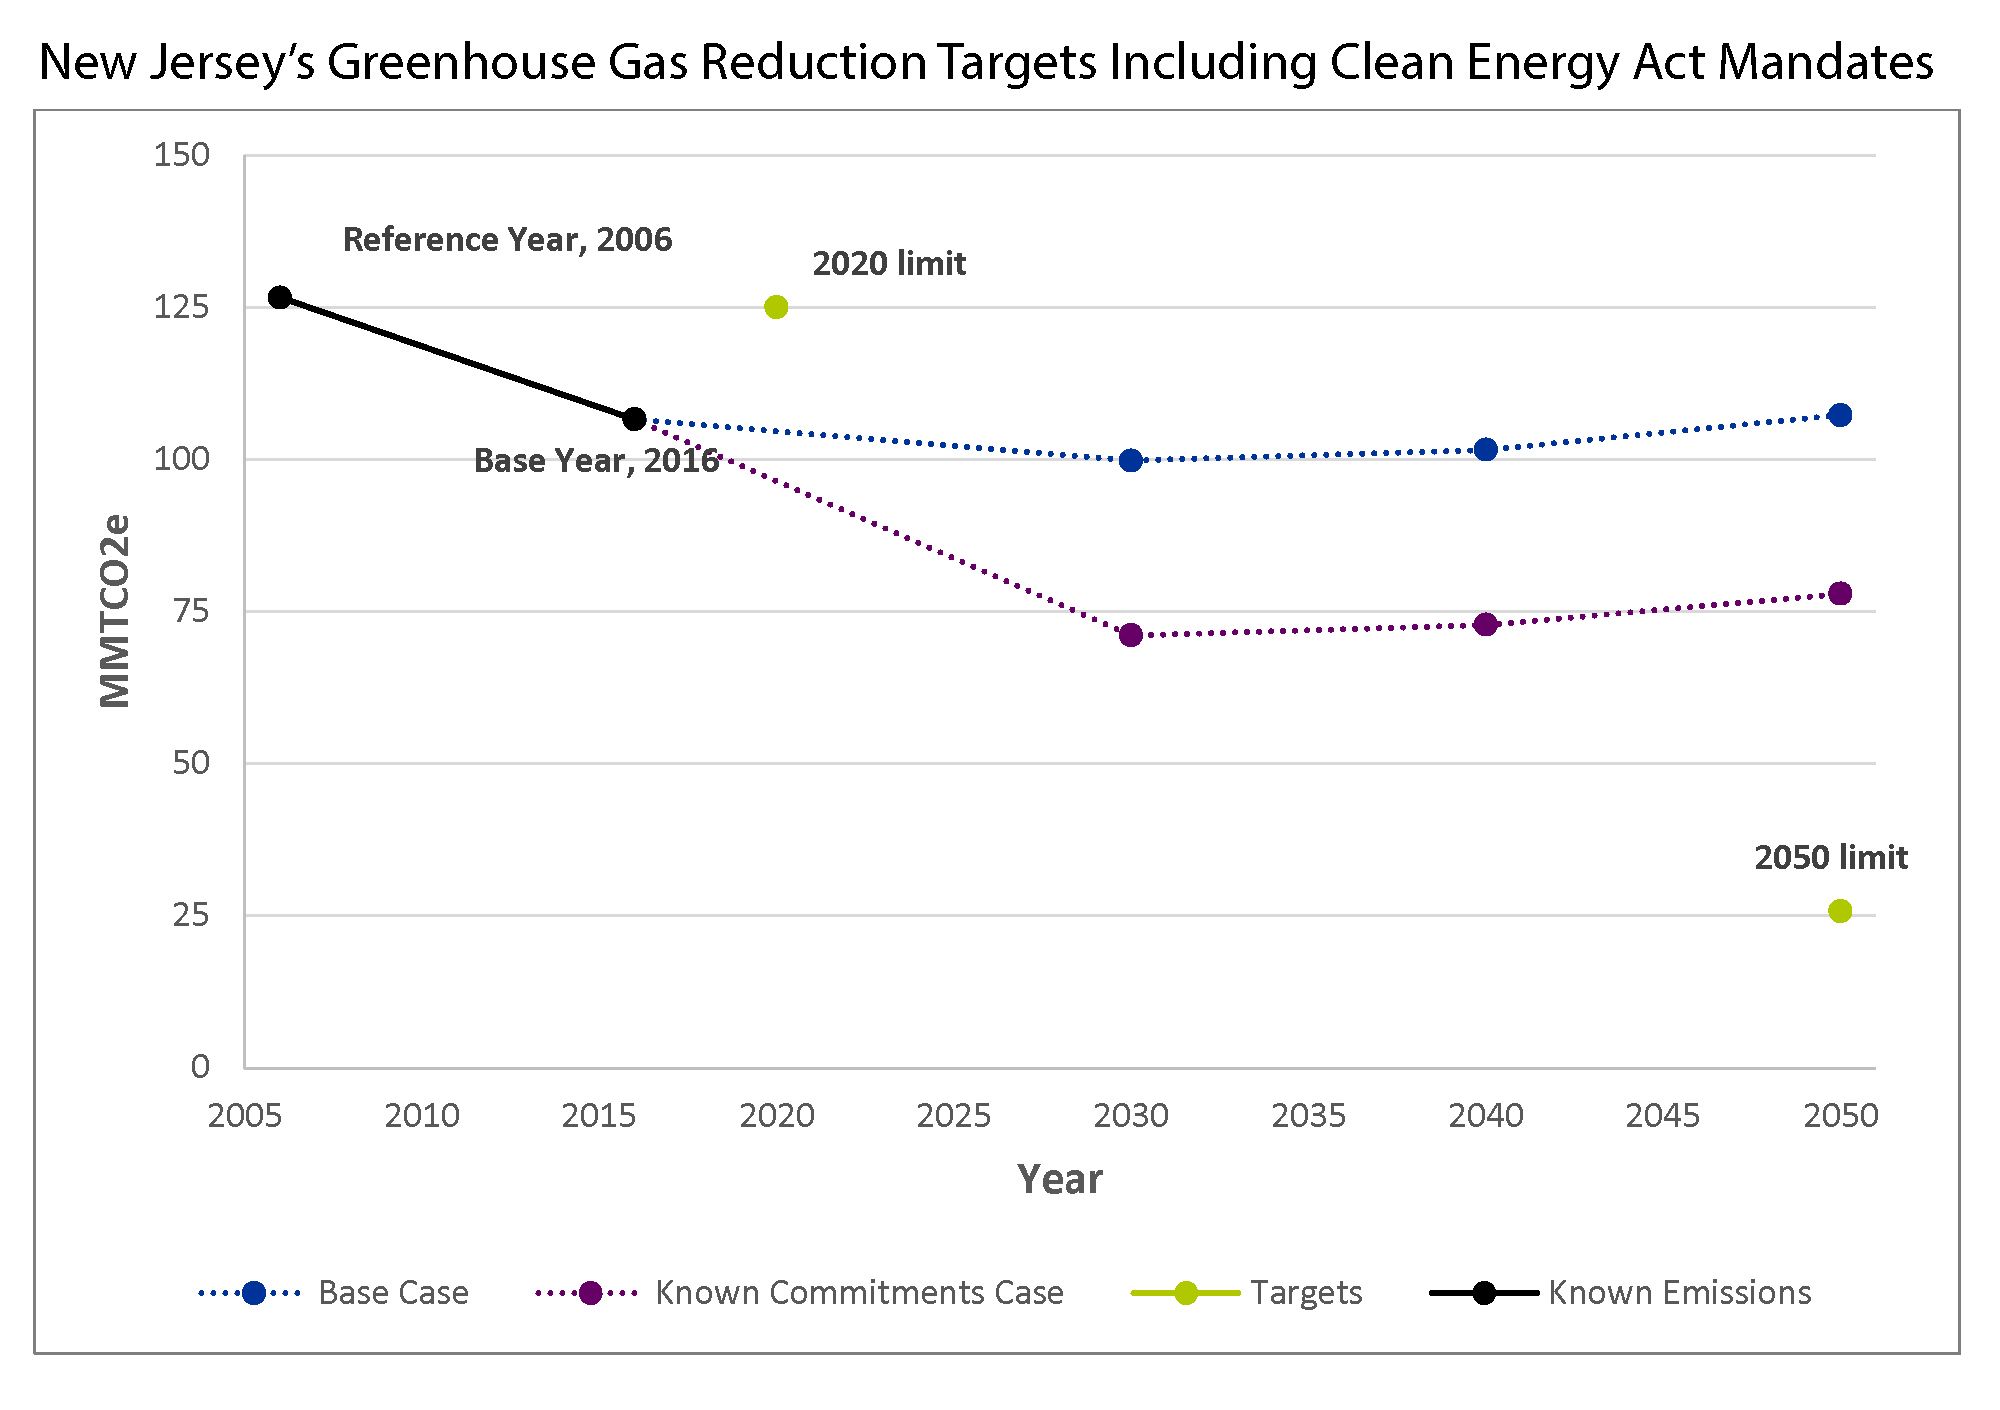 New Jersey's Greenhouse Gas Reduction Targets Including Clean Energy Act Mandates